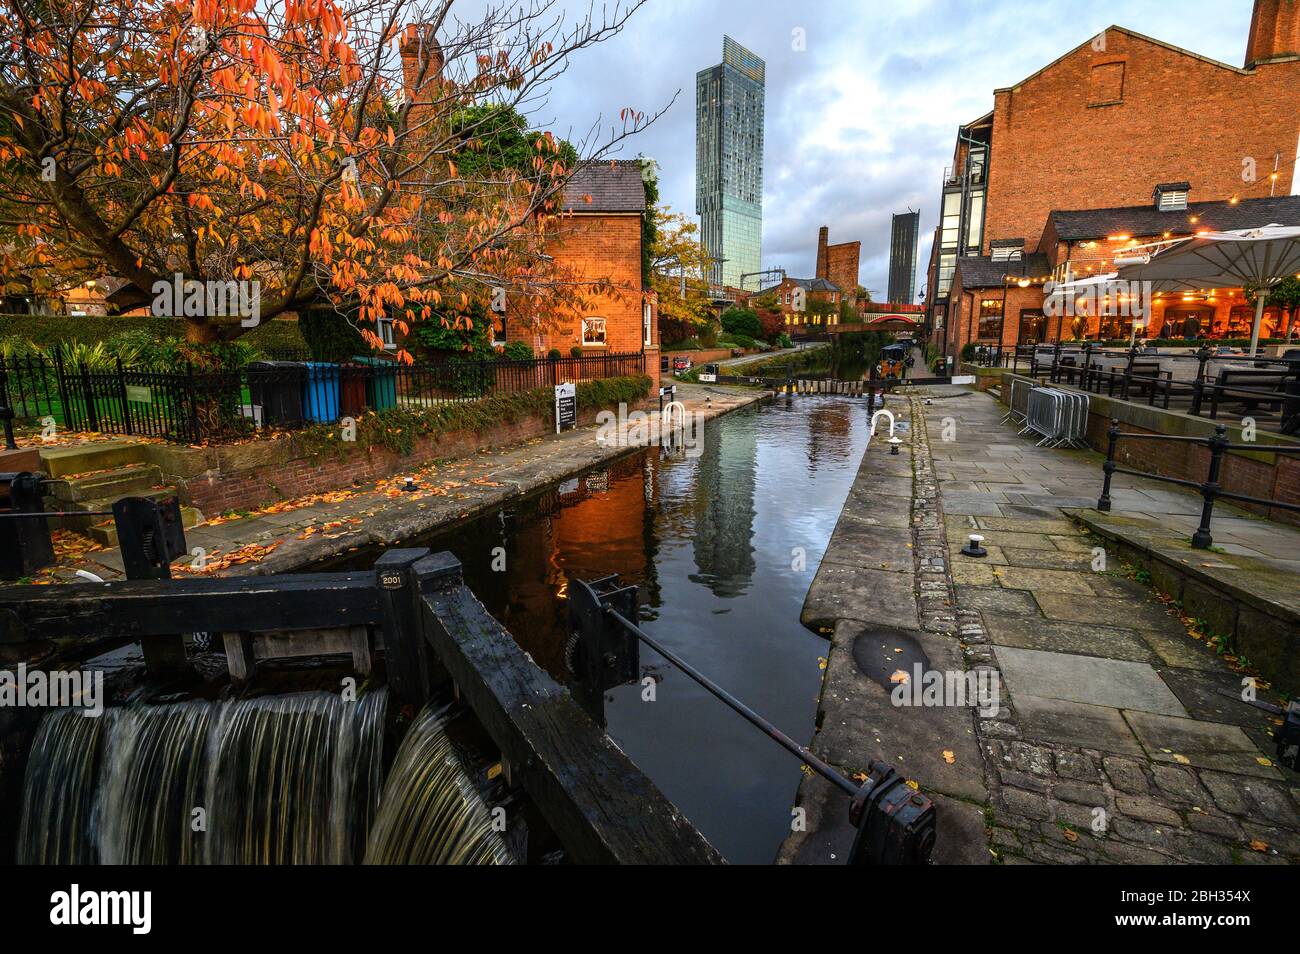 View of Manchester tallest building Beetham Tower, reflecting in Canal Stock Photo